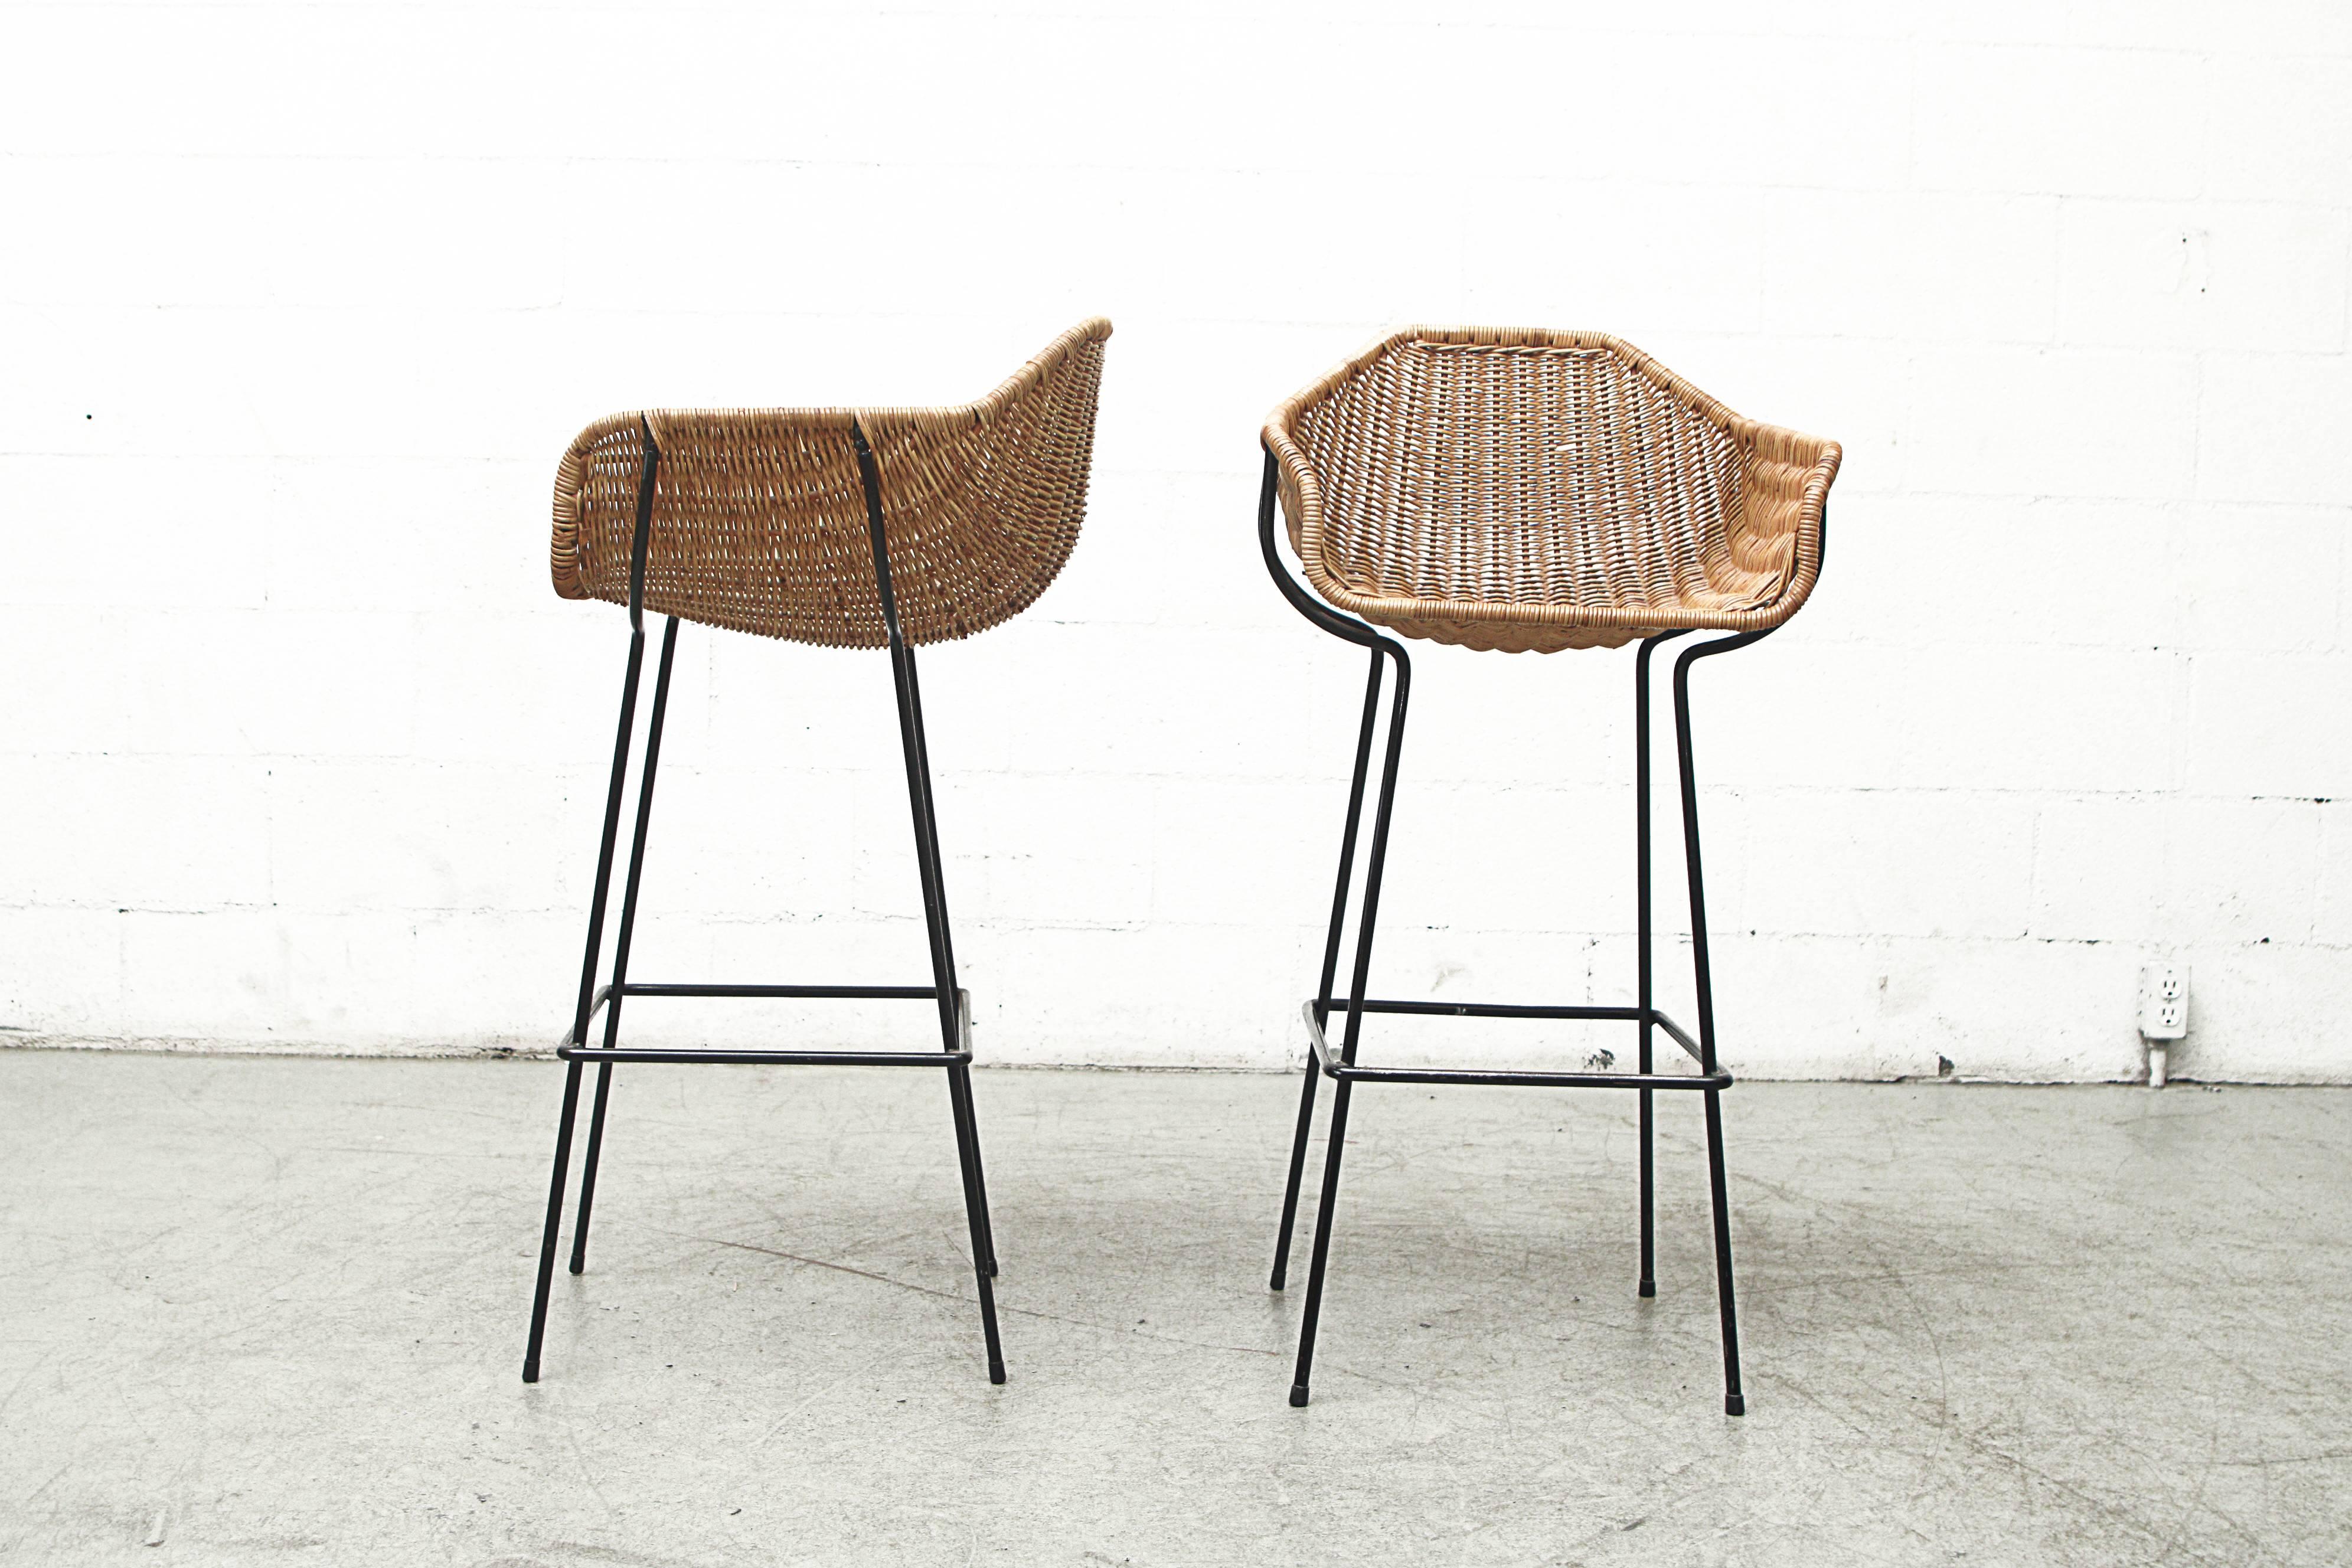 Gorgeous pair of original bar stools with woven rattan bucket seats and black enameled metal frames. Original condition with visible signs of wear consistent with its age and usage. Set price.